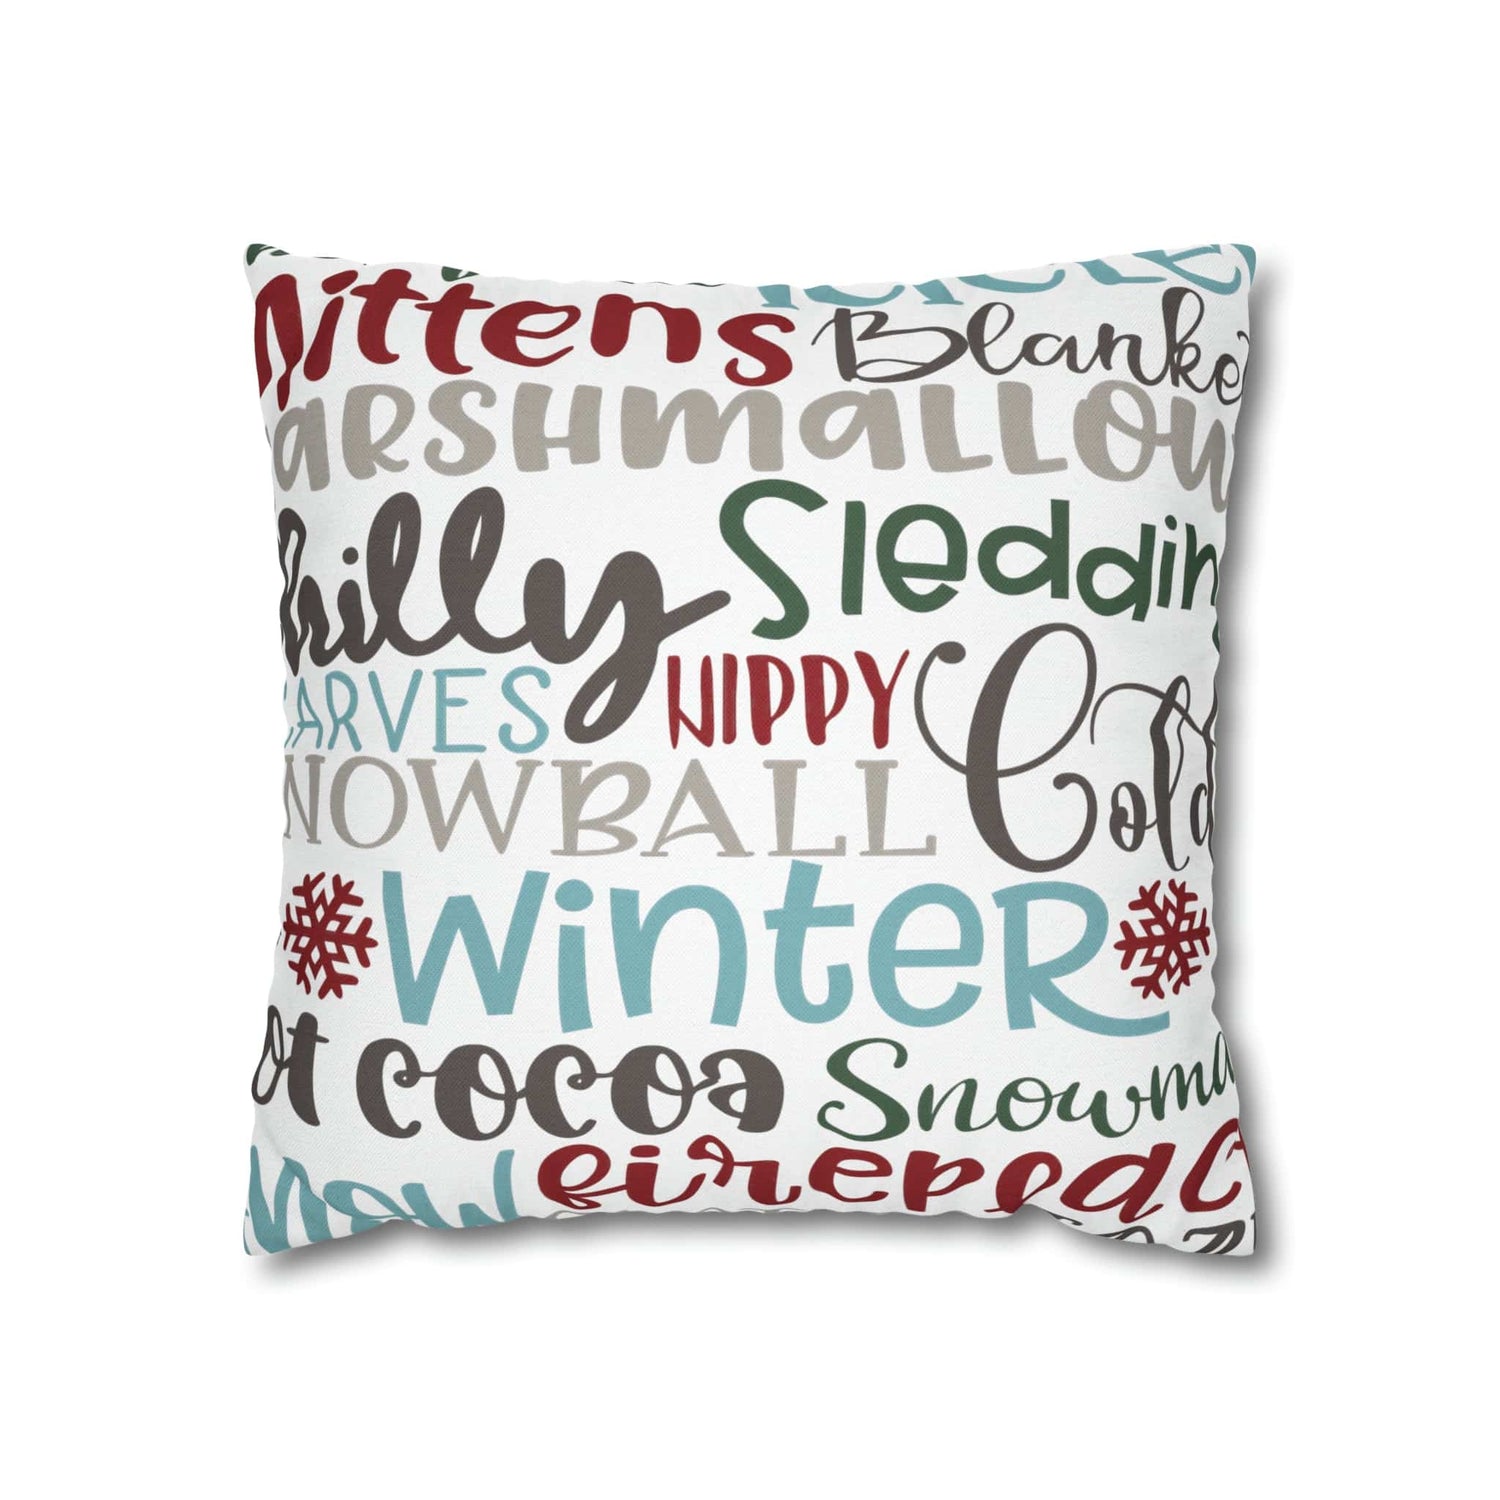 Kate McEnroe New York Christmas Throw Pillow Cover, Mittens, Mashmallows, Snowballs, Sledding, Chilly Winter Word Art Cushion Covers, Farmhouse DecorThrow Pillow Covers23551584984131314220